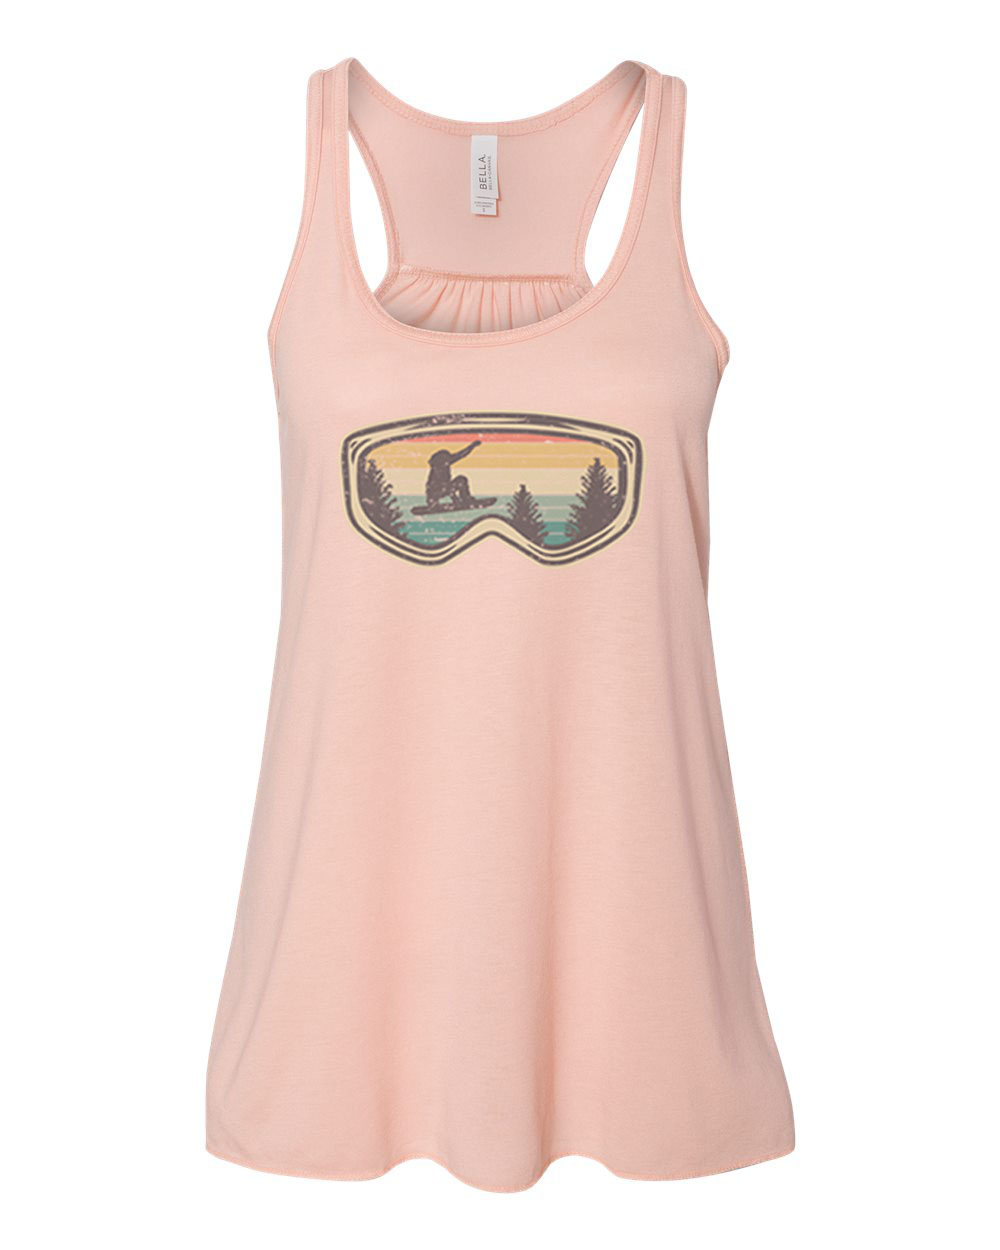 "Women's Snowboarding Tank Top, Snowboard Goggles, Racerback, Soft Bella Canvas, Snowboard Shirt, Gift For Her, Skiing Apparel, Snow Goggles, Peach, SMALL" - image 1 of 1